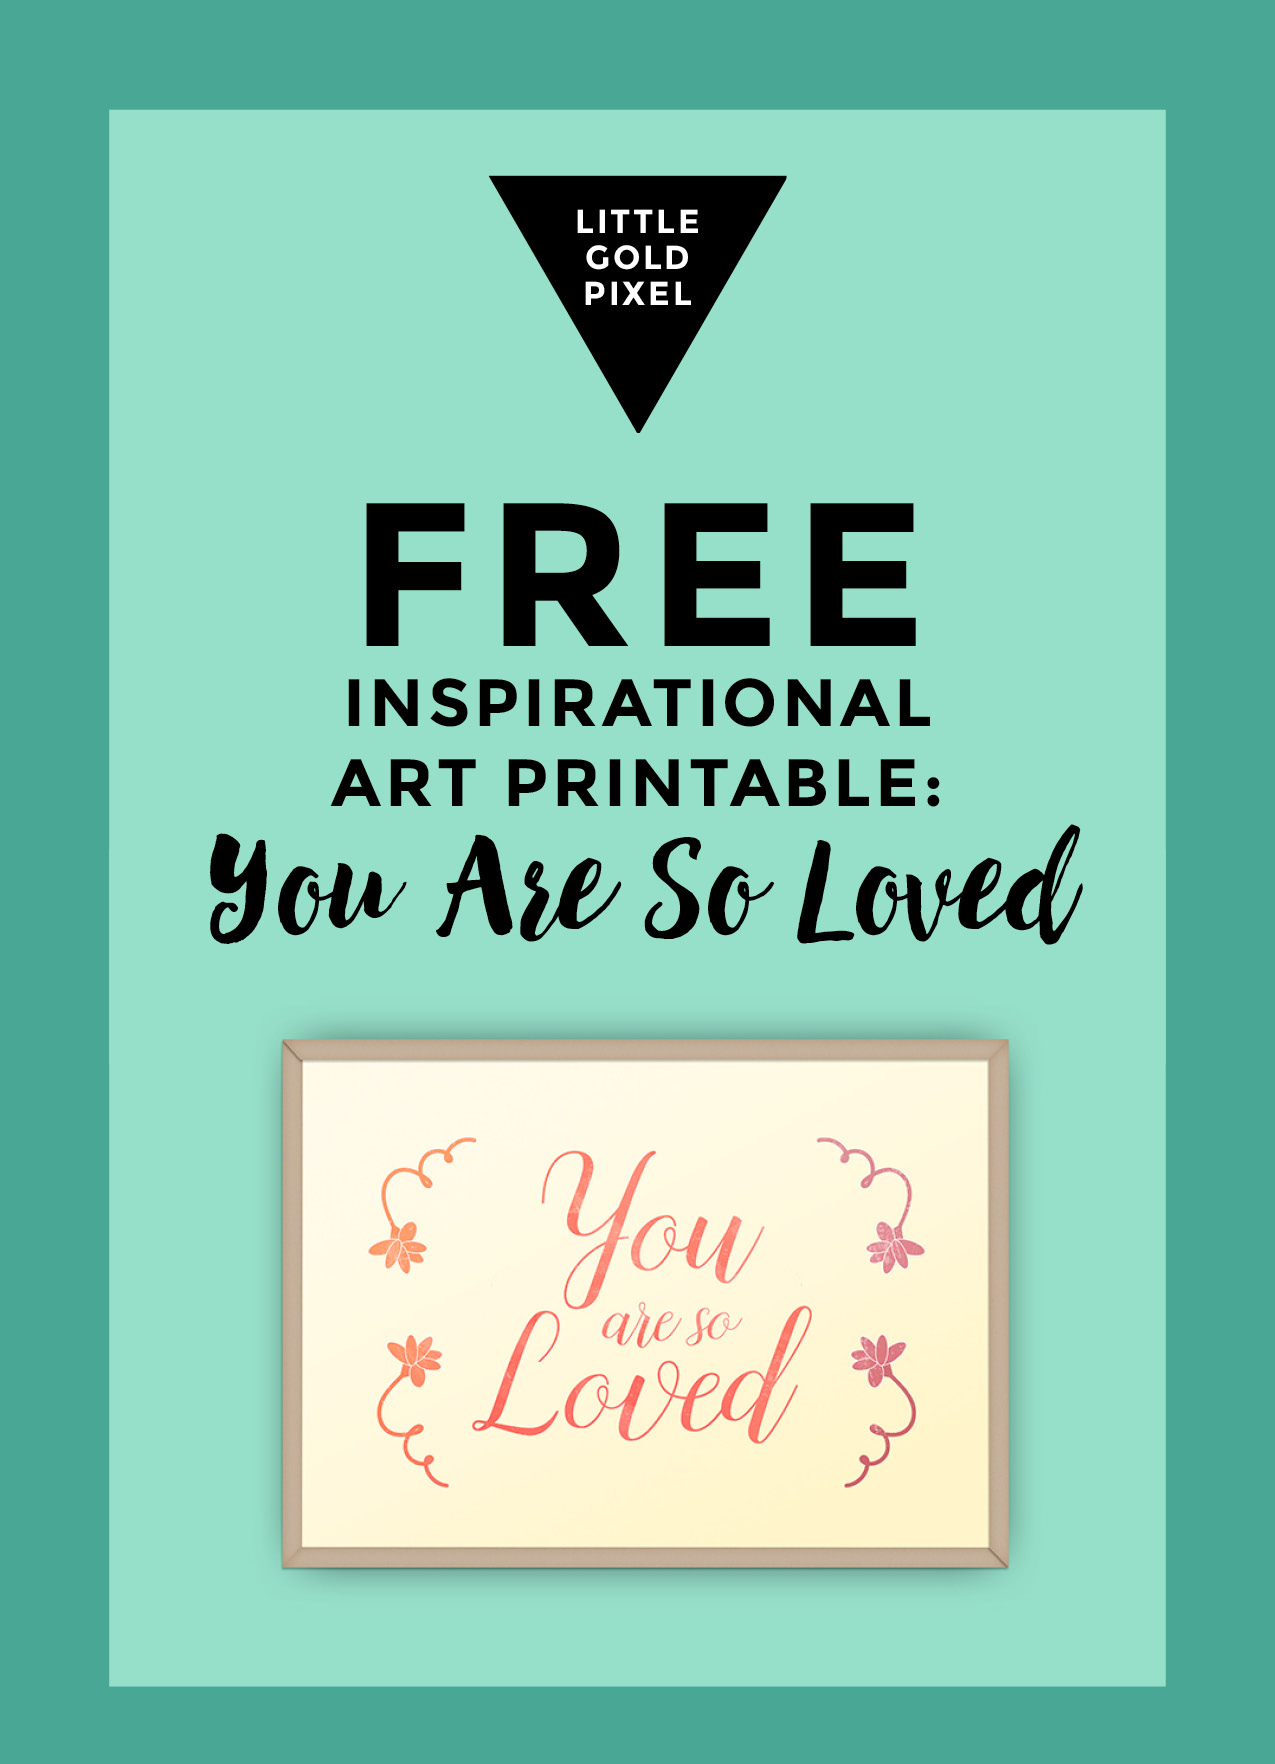 You Are So Loved Art Printable / Freebie Fridays • Little Gold Pixel